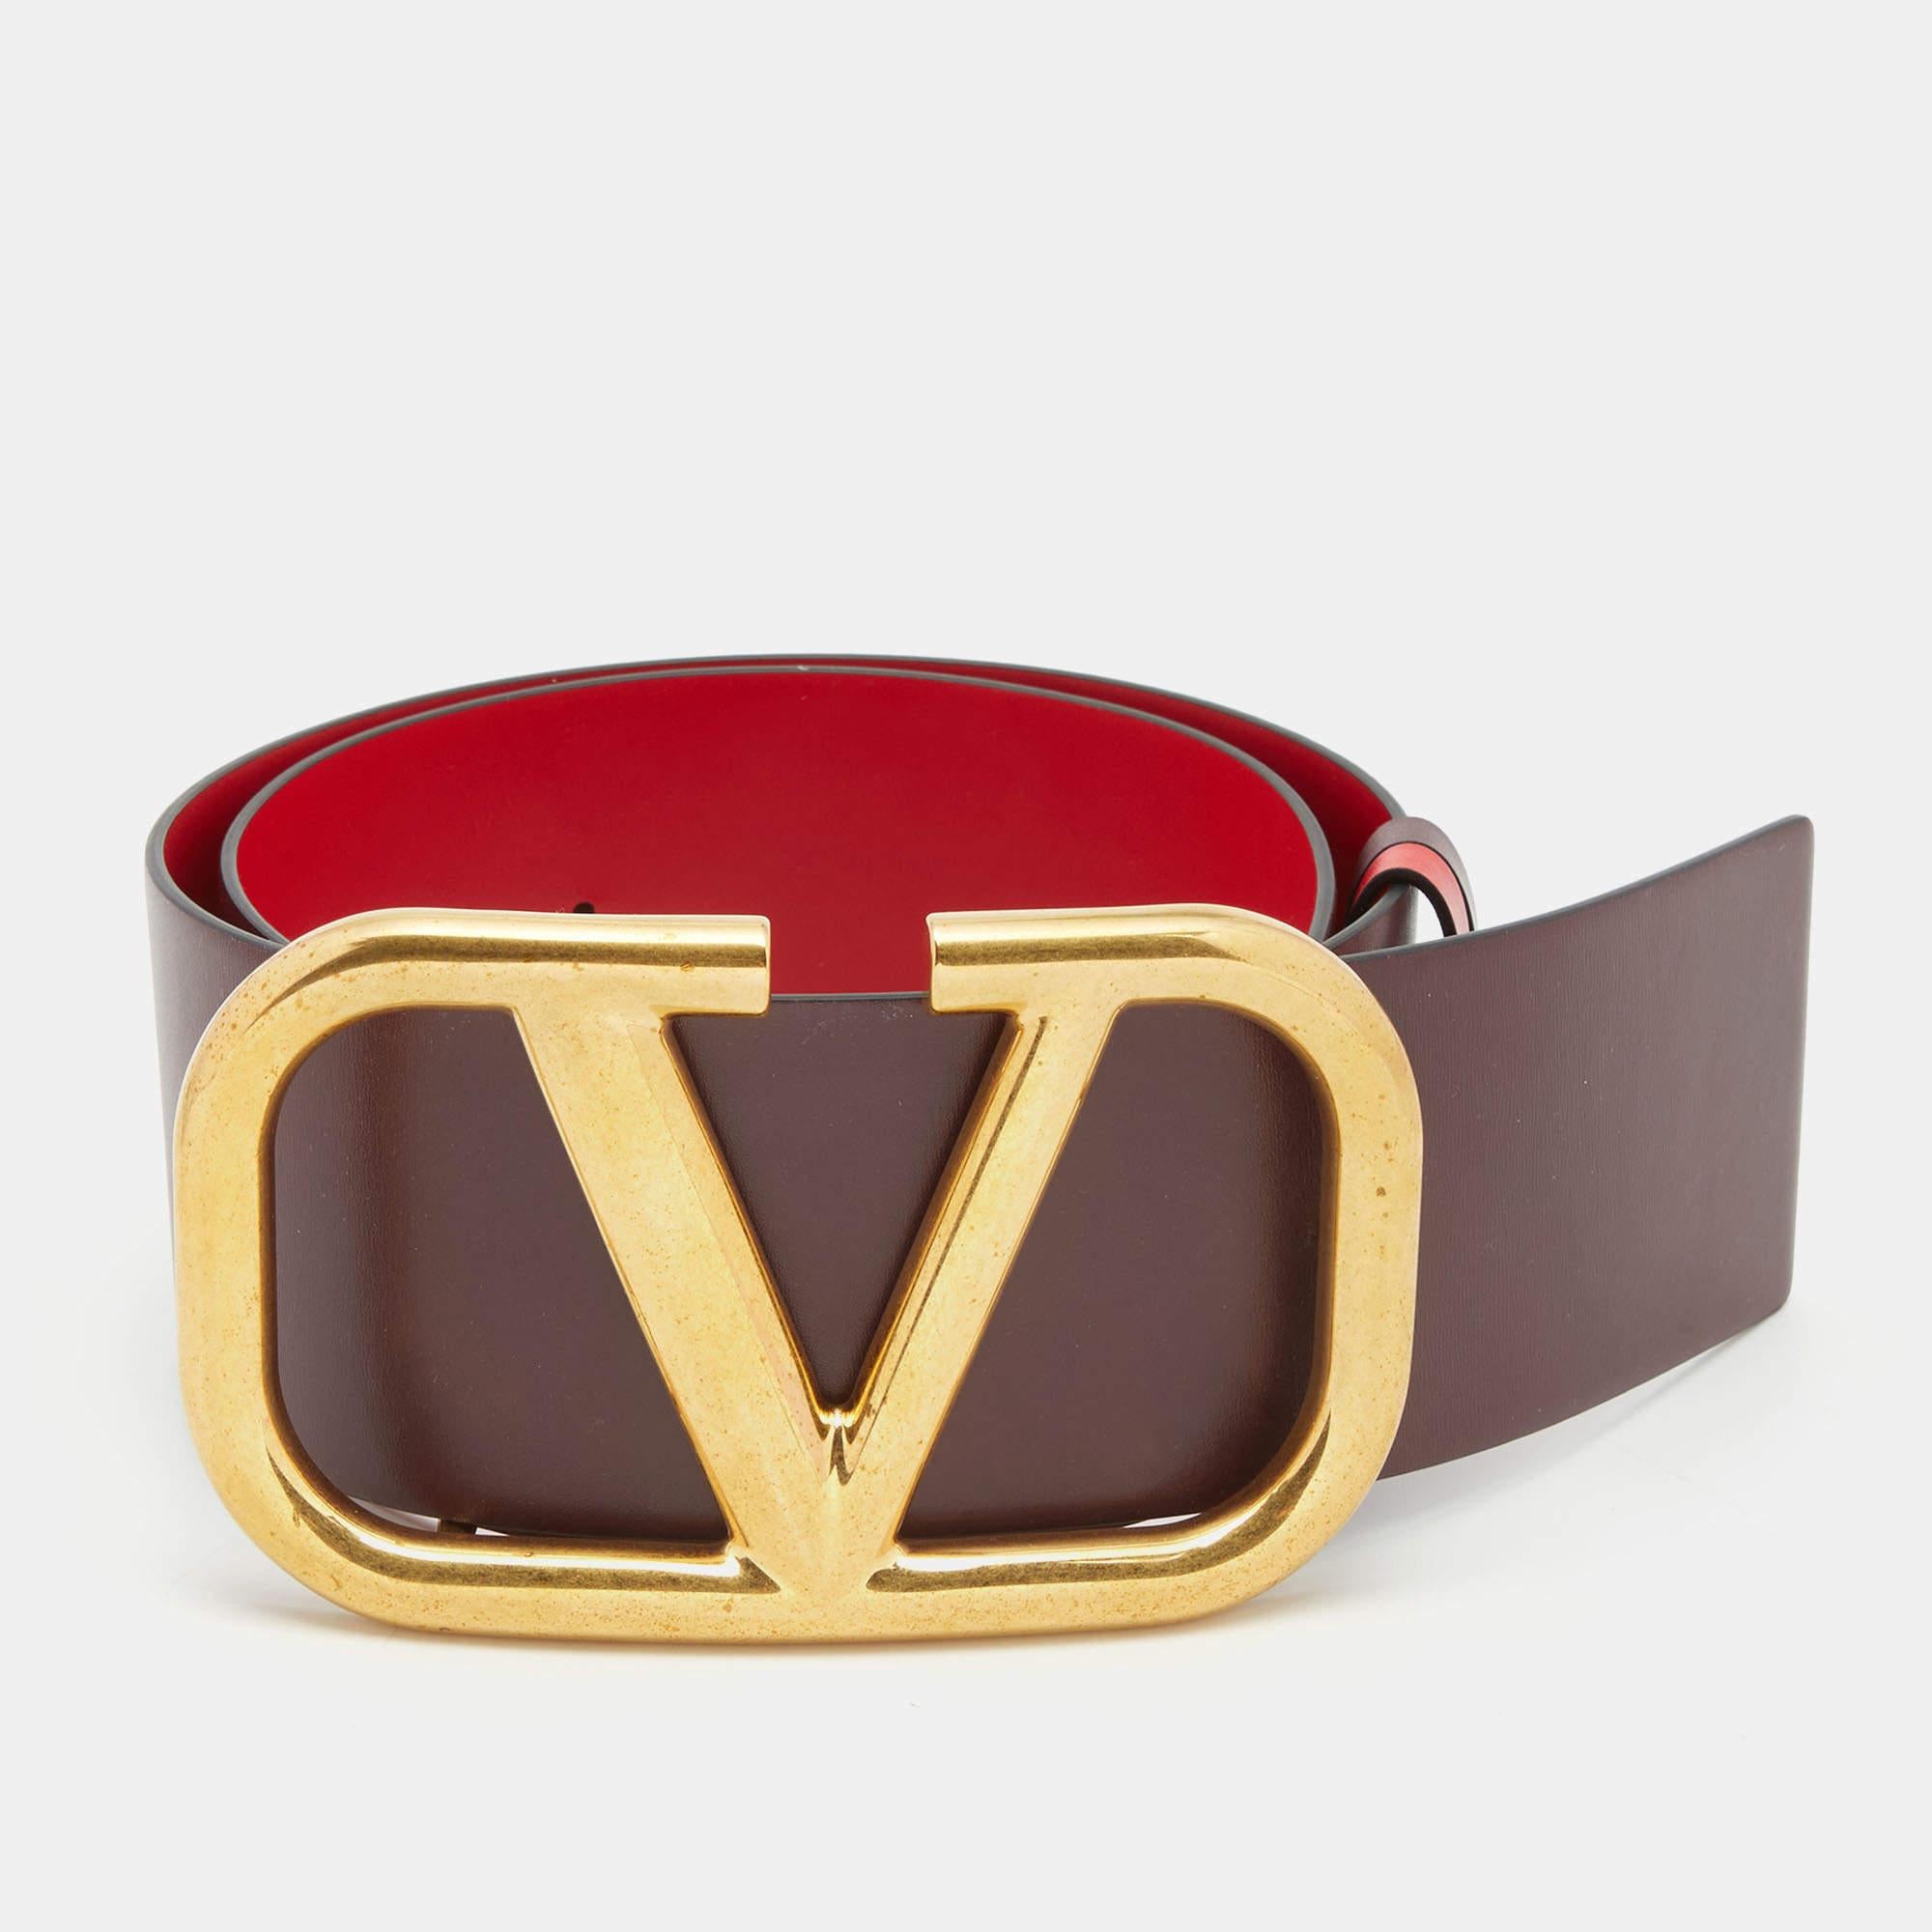 Belts are fine accessories to upgrade any basic look to a statement-making one. We particularly love this offering by Valentino. Formed using the finest materials, the belt has a well-made buckle and an impeccable finish.

Includes: Original